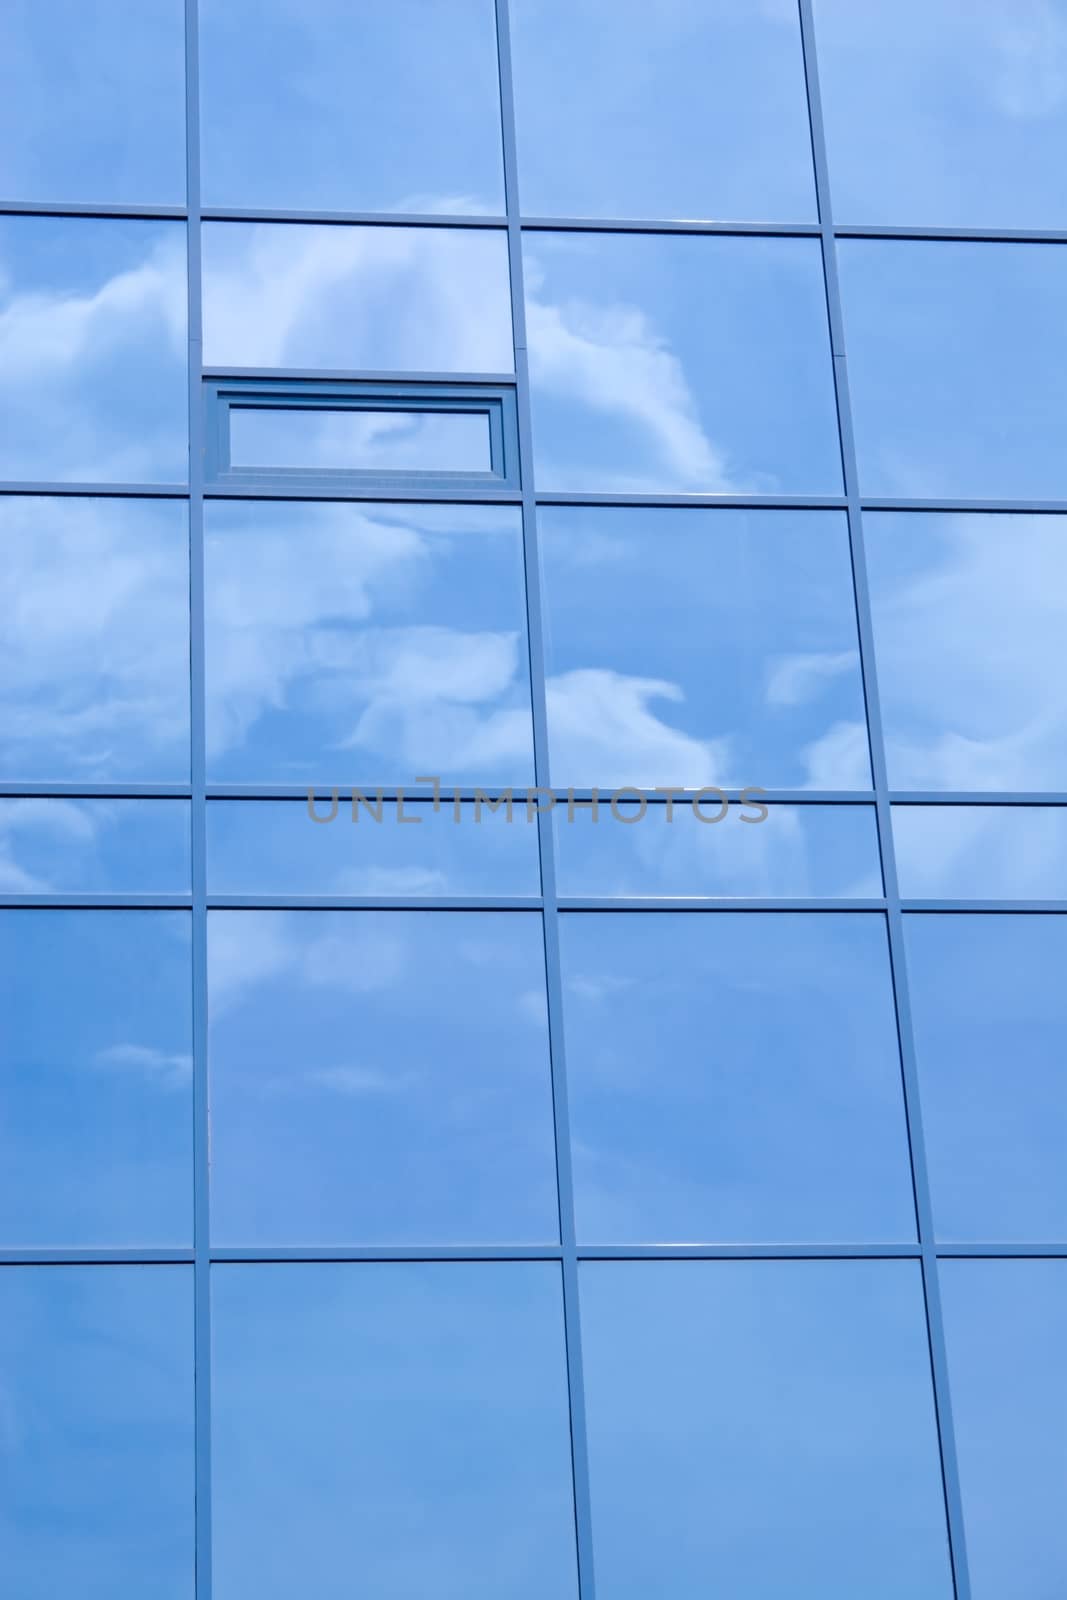 Reflection of the sky in windows of a skyscraper.